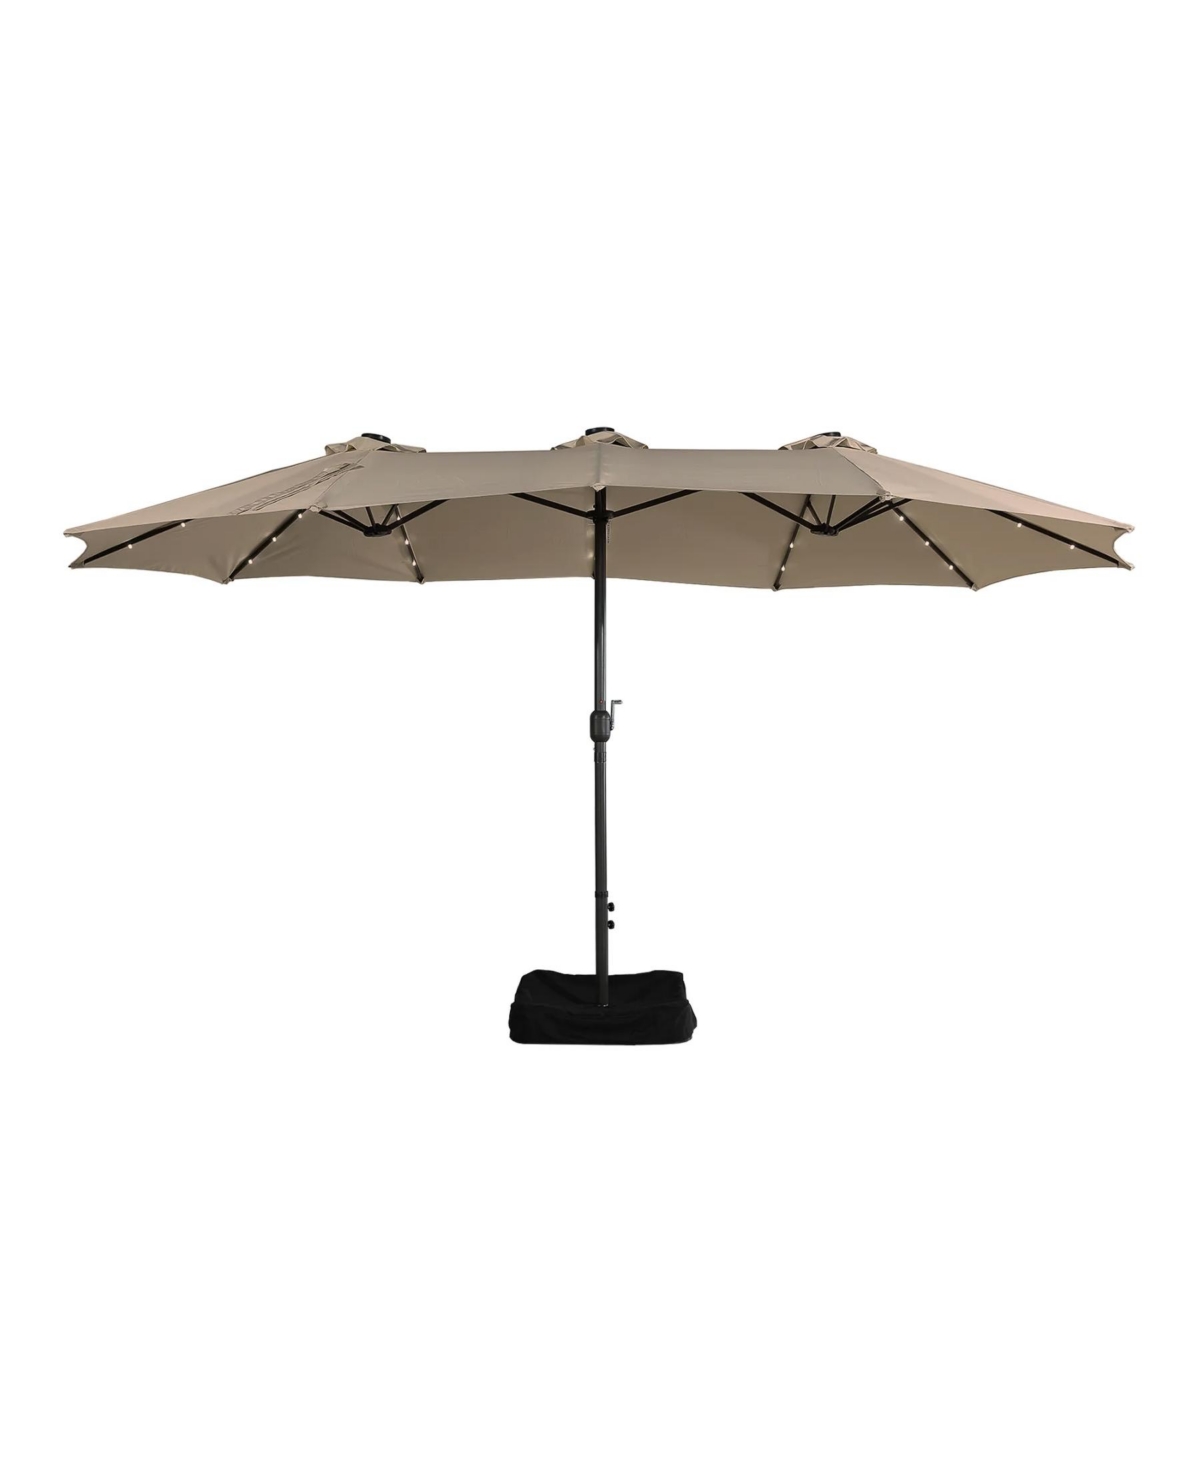 15 ft Solar Led Double Sided Twin Outdoor Patio Market Umbrella with Base Weight Included, Coffee - Beige